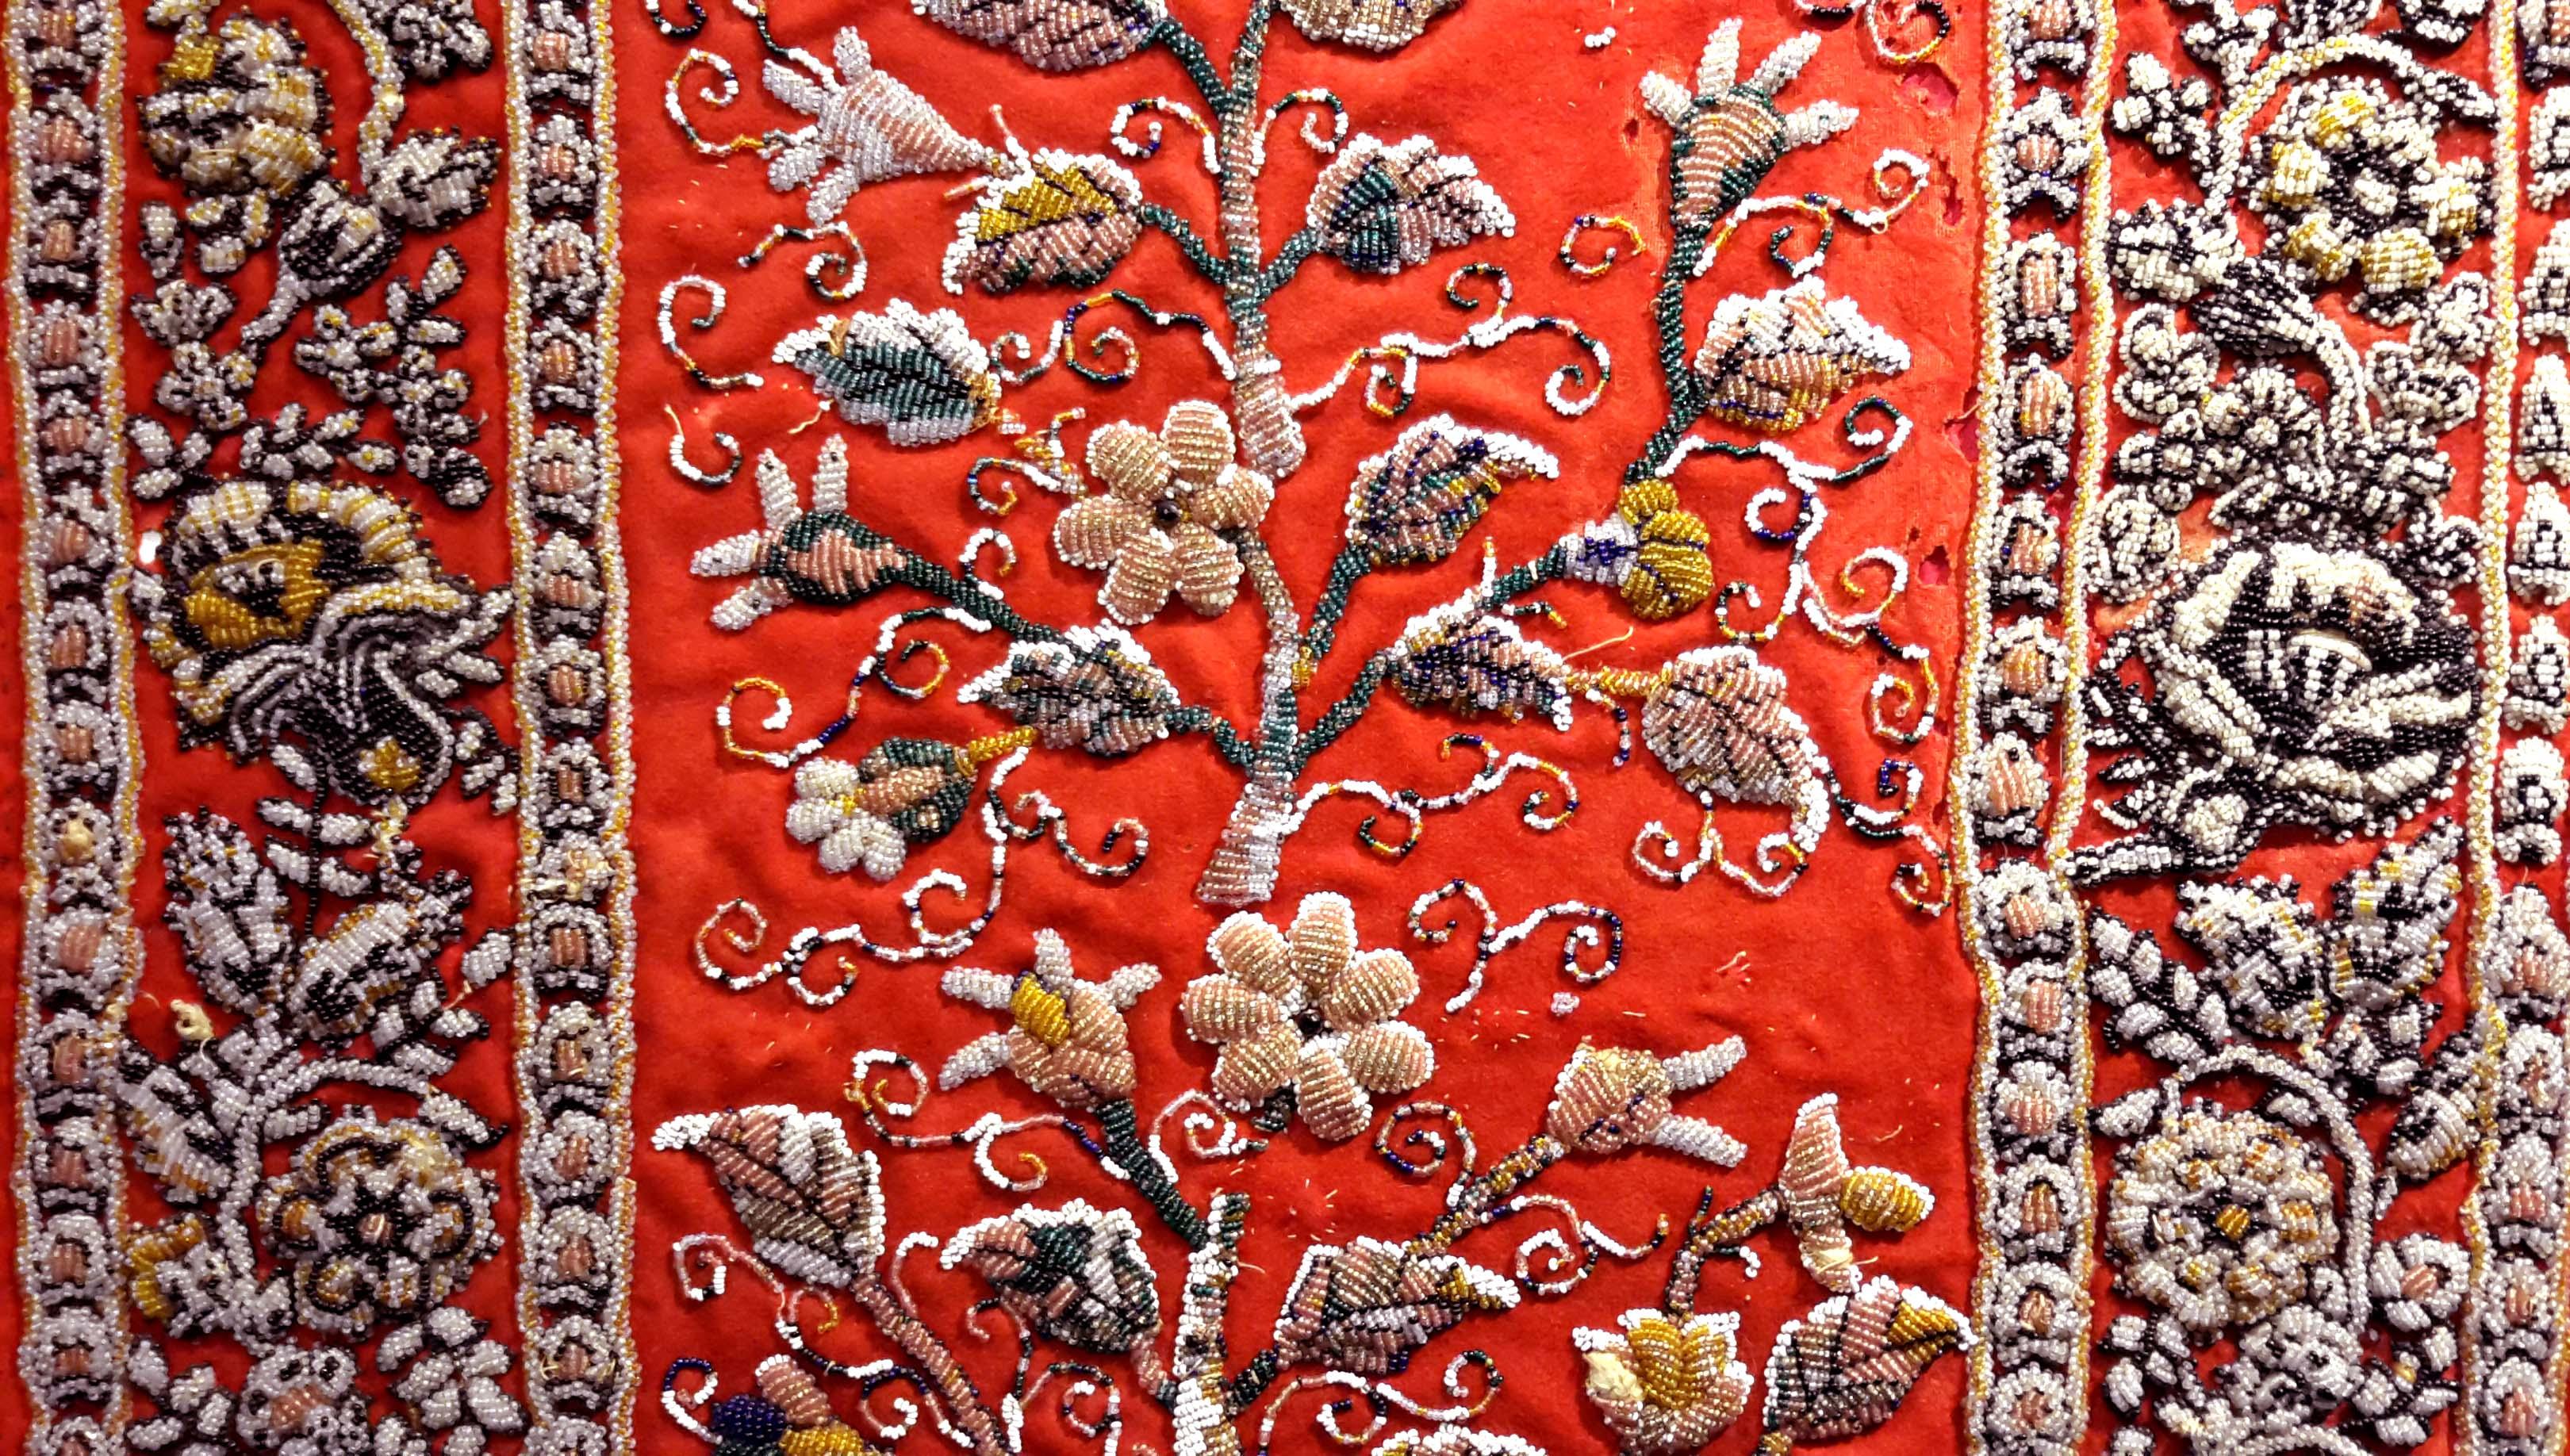 19th century raised beadwork panel textile. Possibly ottoman, Turkish. All handmade on a red wool background. Later framed.